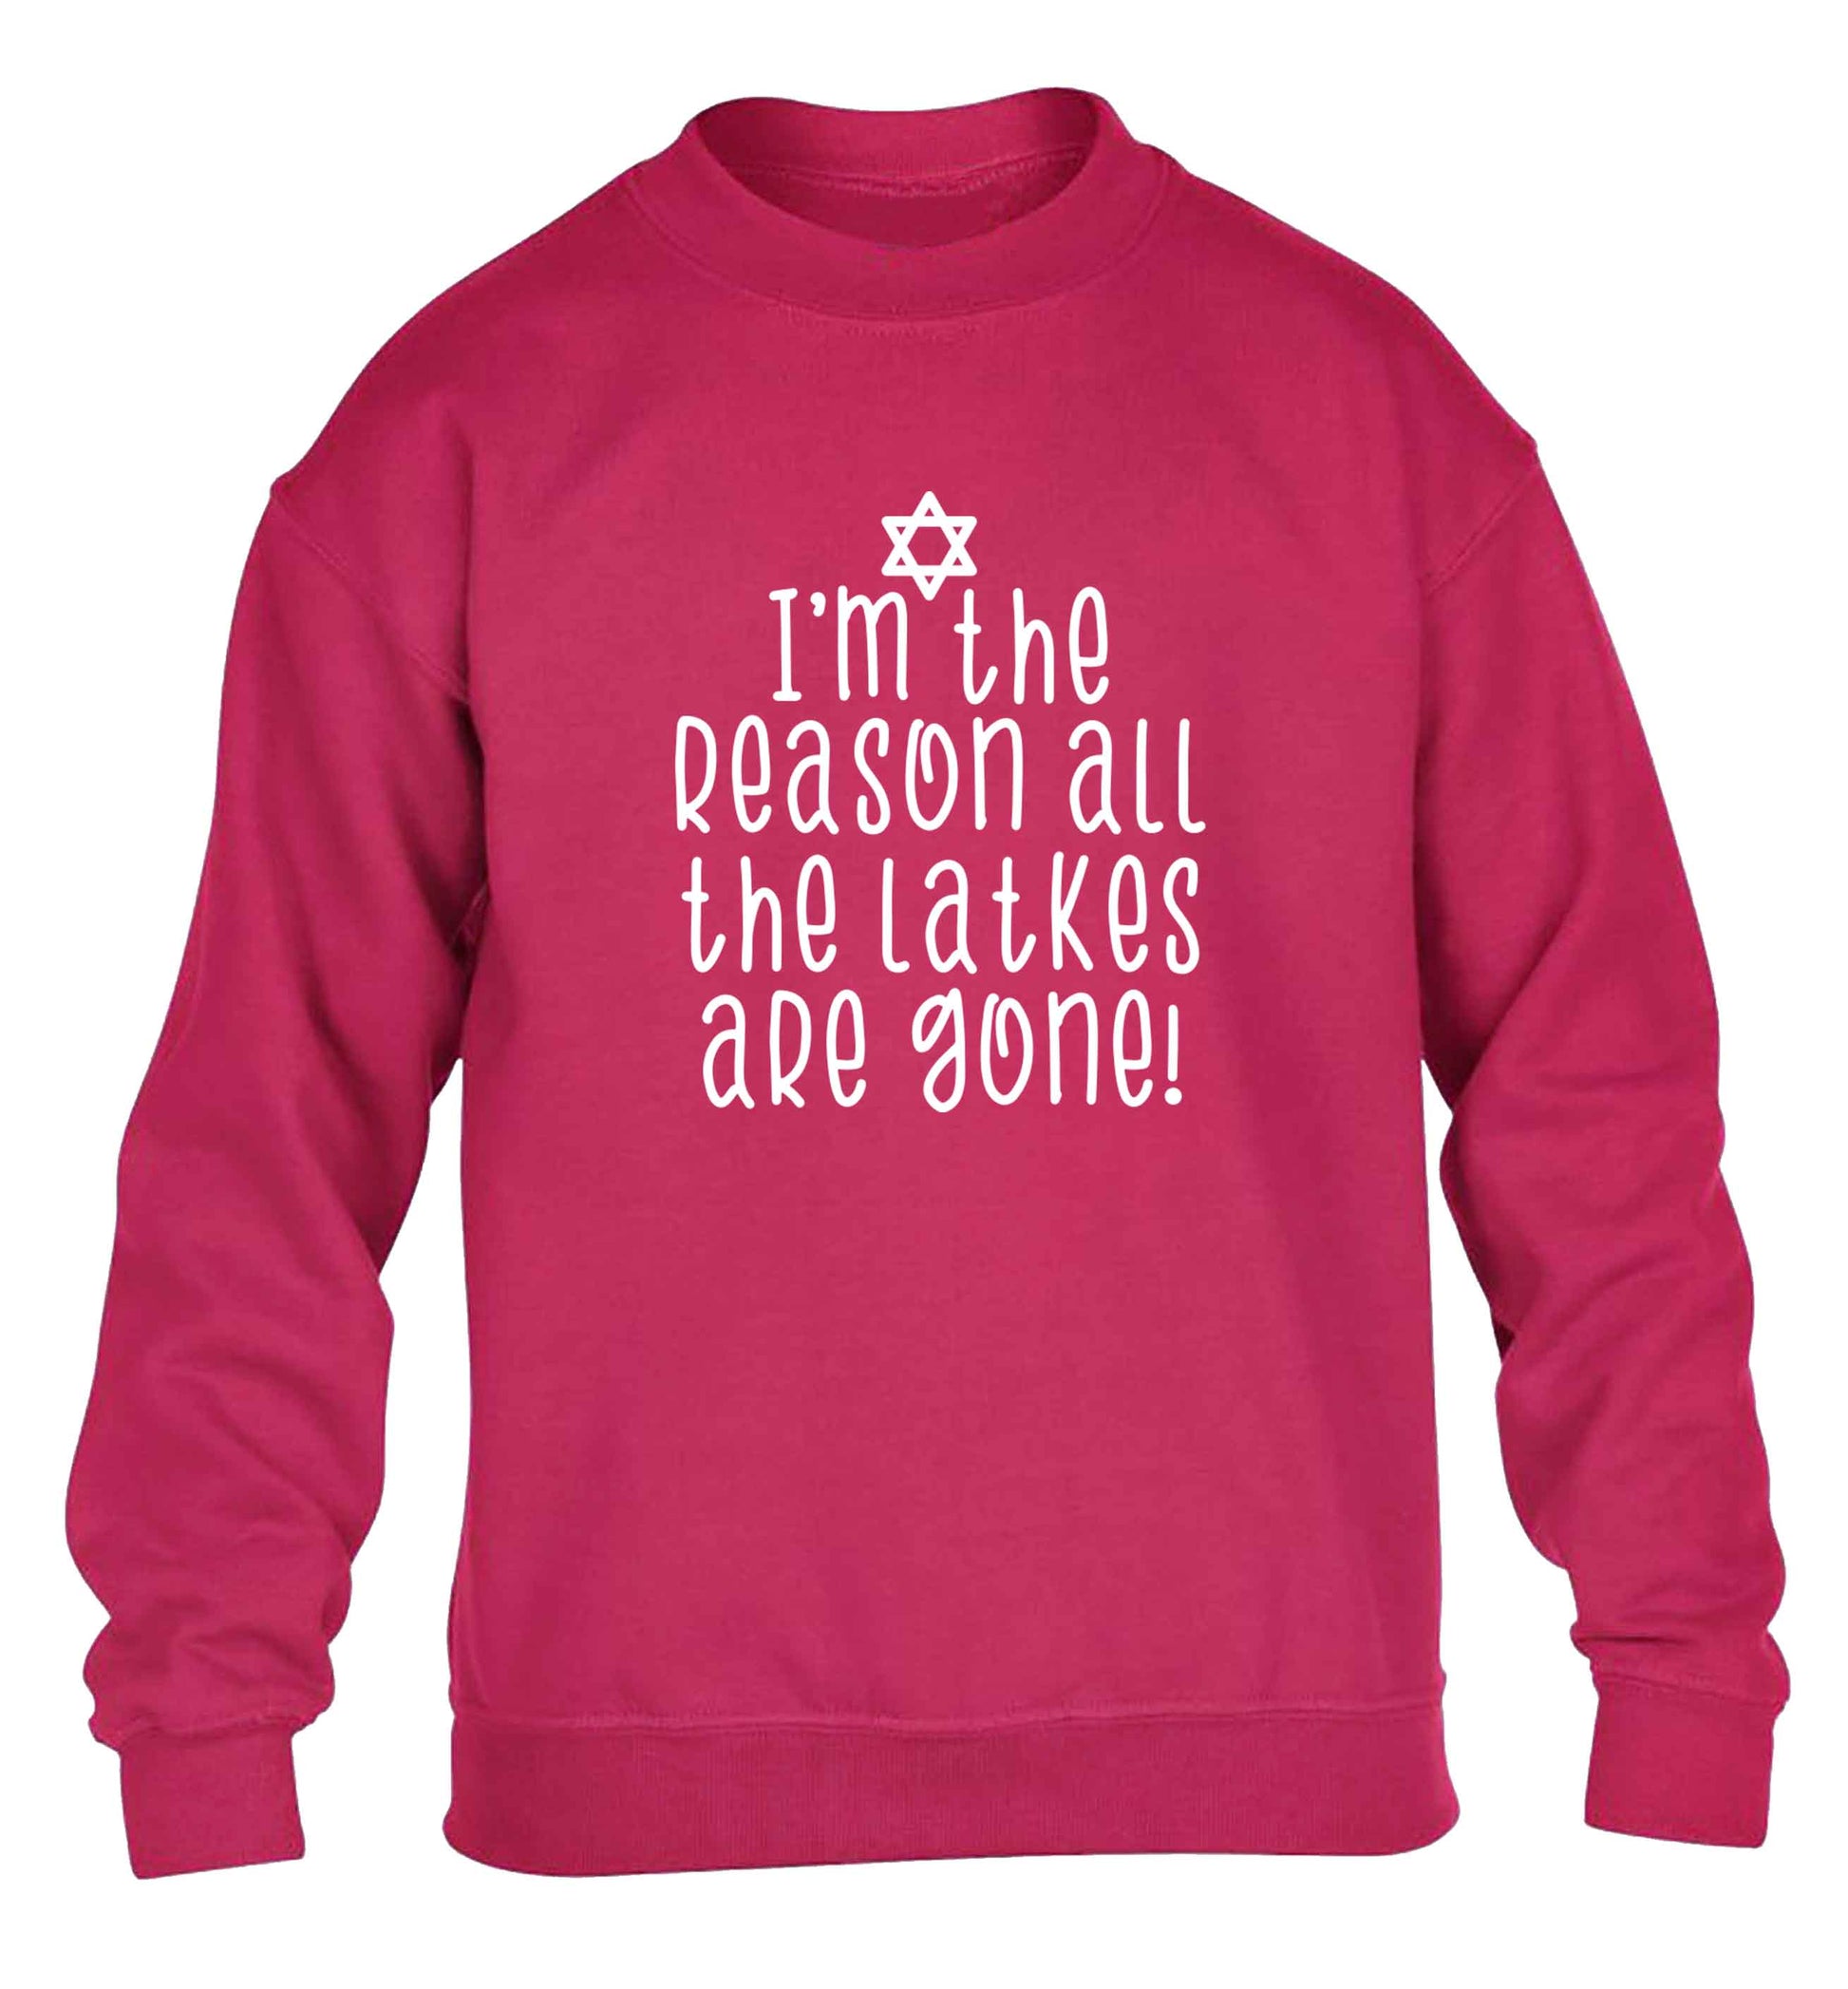 I'm the reason all the latkes are gone children's pink sweater 12-13 Years